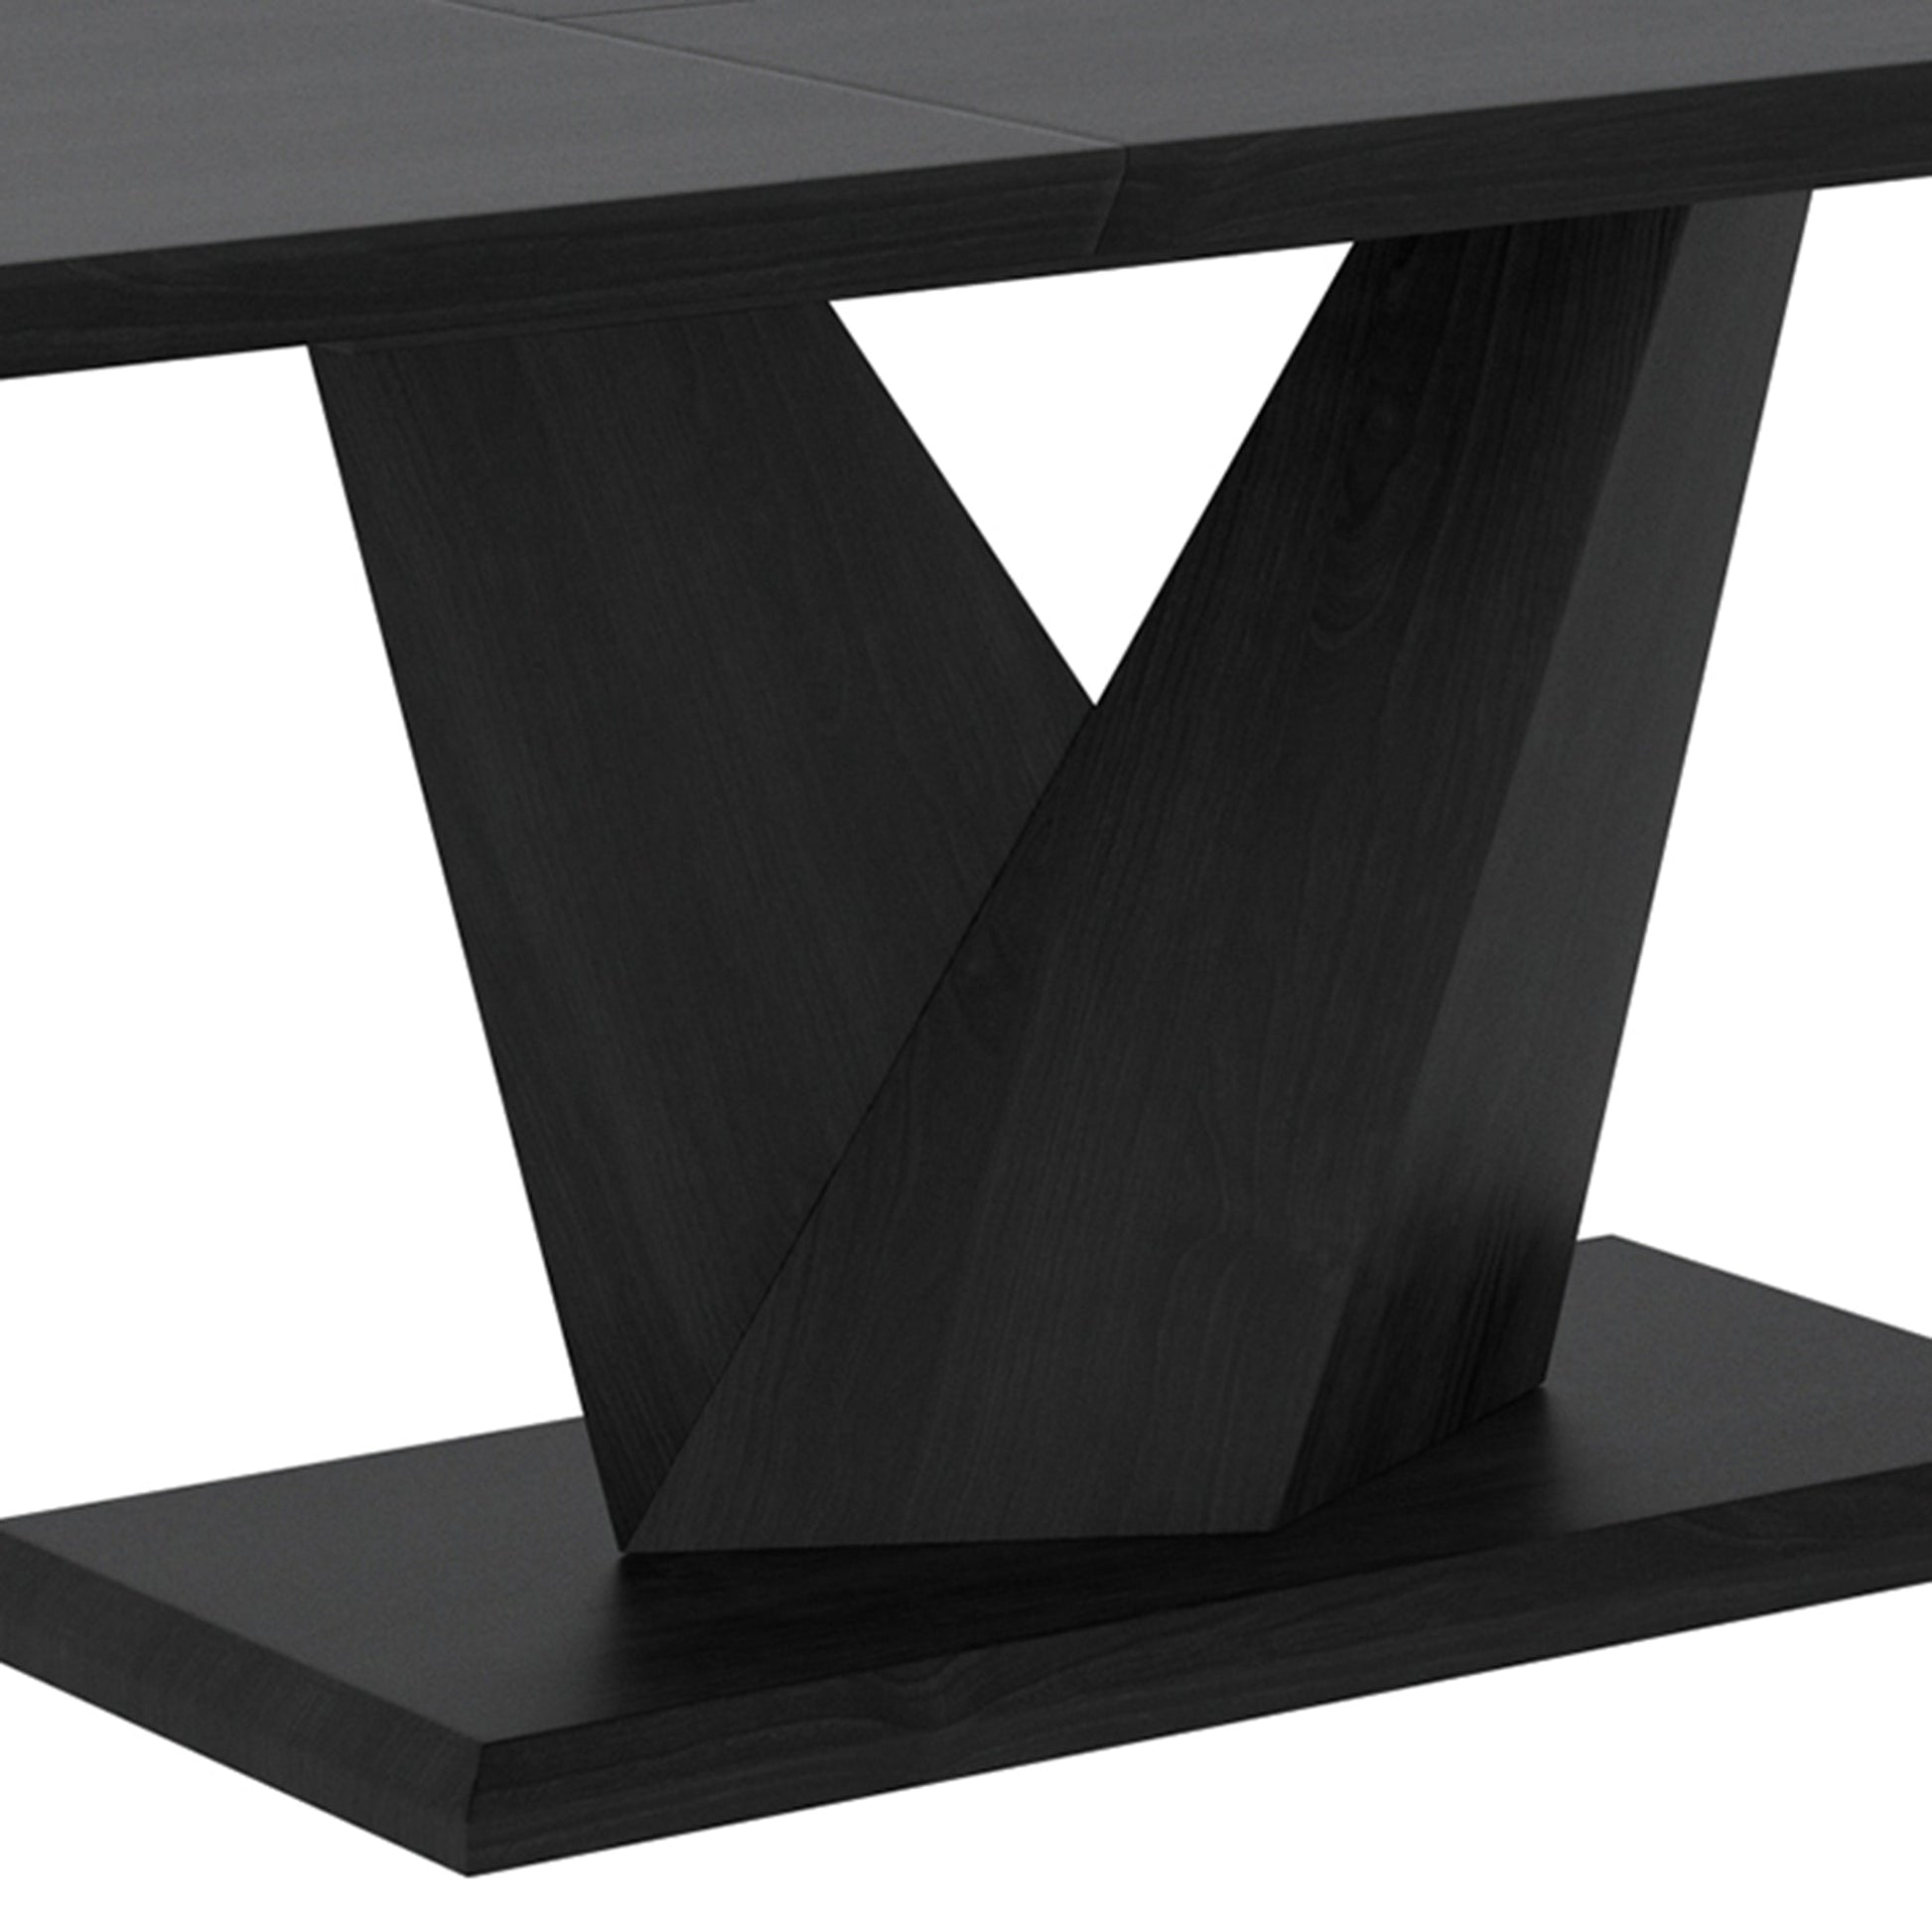 Extendable Rectangular Dining Table Eclipse Black - Your Bar Stools Canada